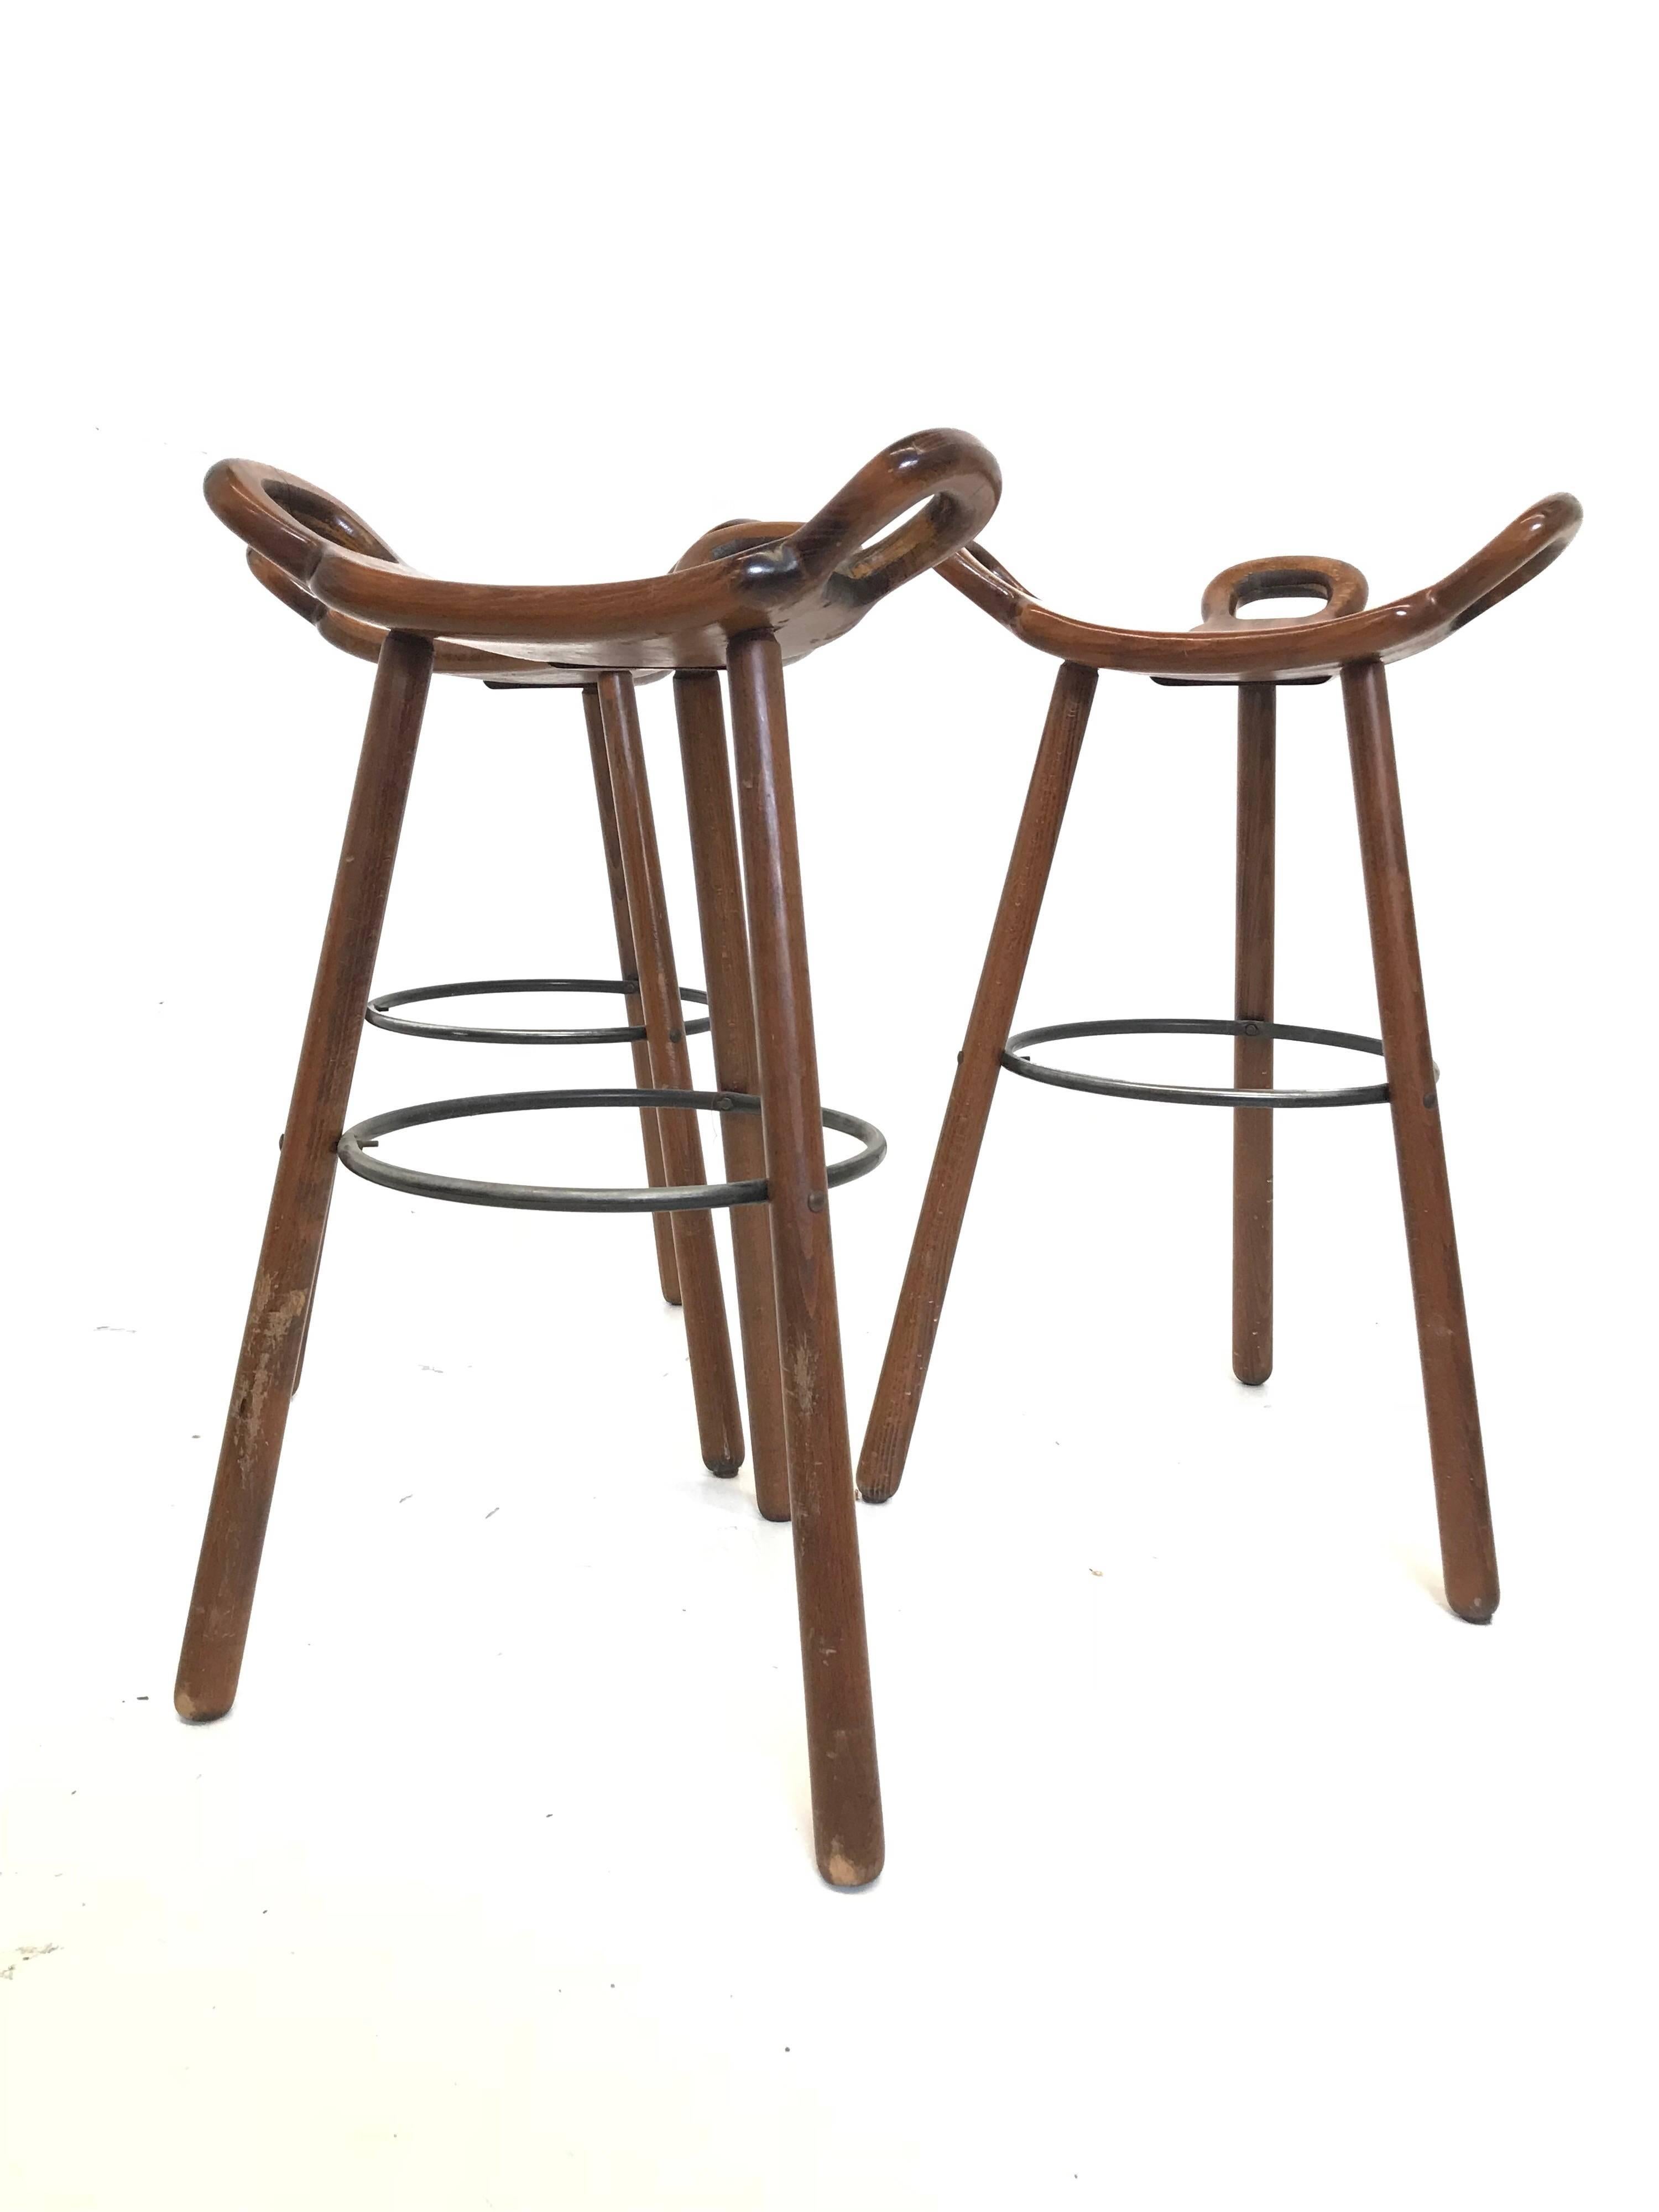 Set of three 'Brutalist' or 'Marbella' bar stools, in stained beech and metal, Spain, 1970s. A curved T-shape with three handles. The curved form makes sure the stool has a stabile seat, emphasized by the metal ring as footrest. These bar stools are